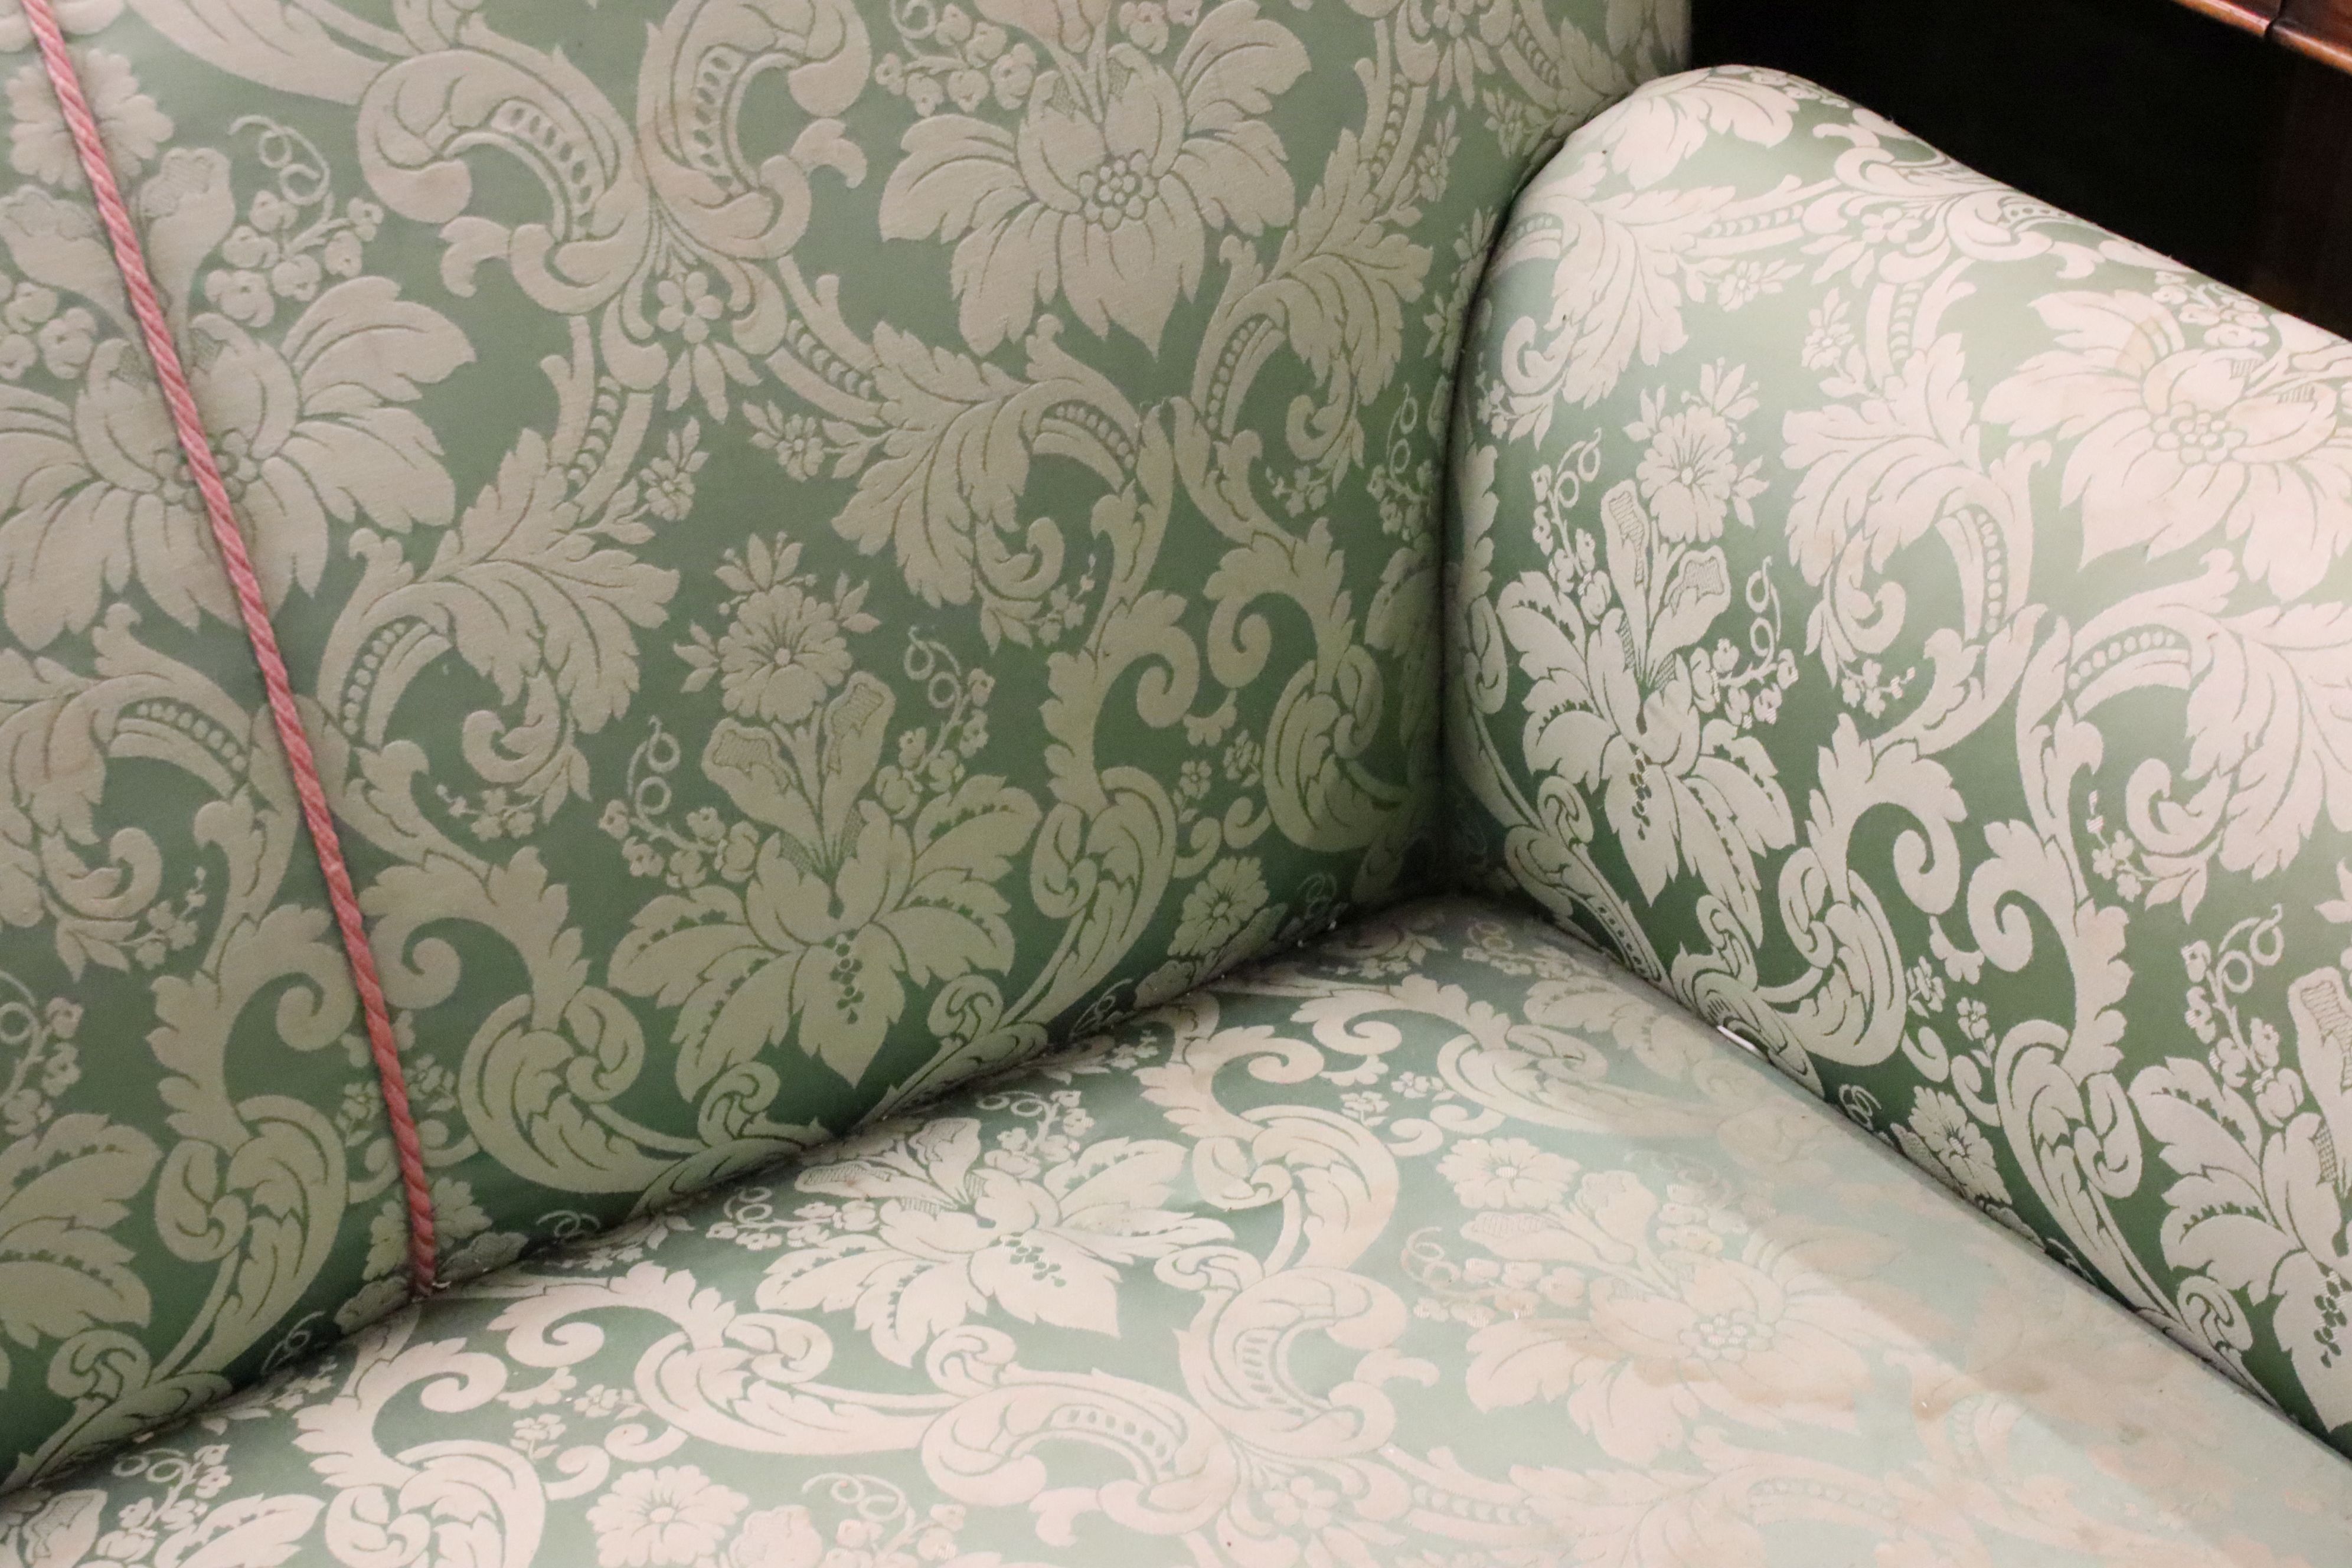 Early 20th century Two Seater Drop End Sofa, upholstered in green damask fabric sand raised on bun - Image 3 of 6